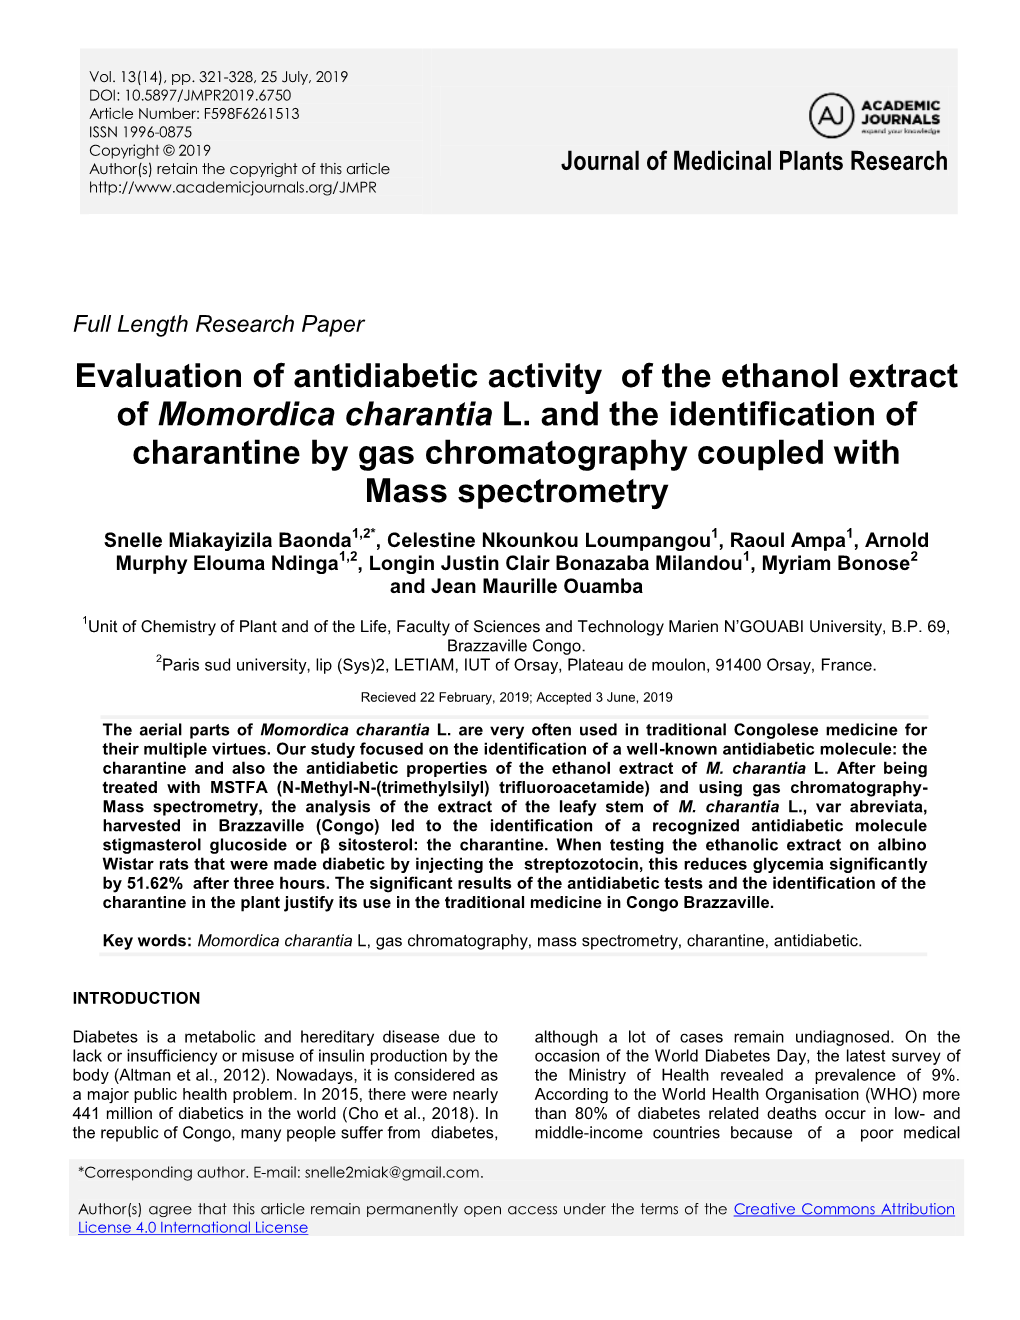 Evaluation of Antidiabetic Activity of the Ethanol Extract of Momordica Charantia L